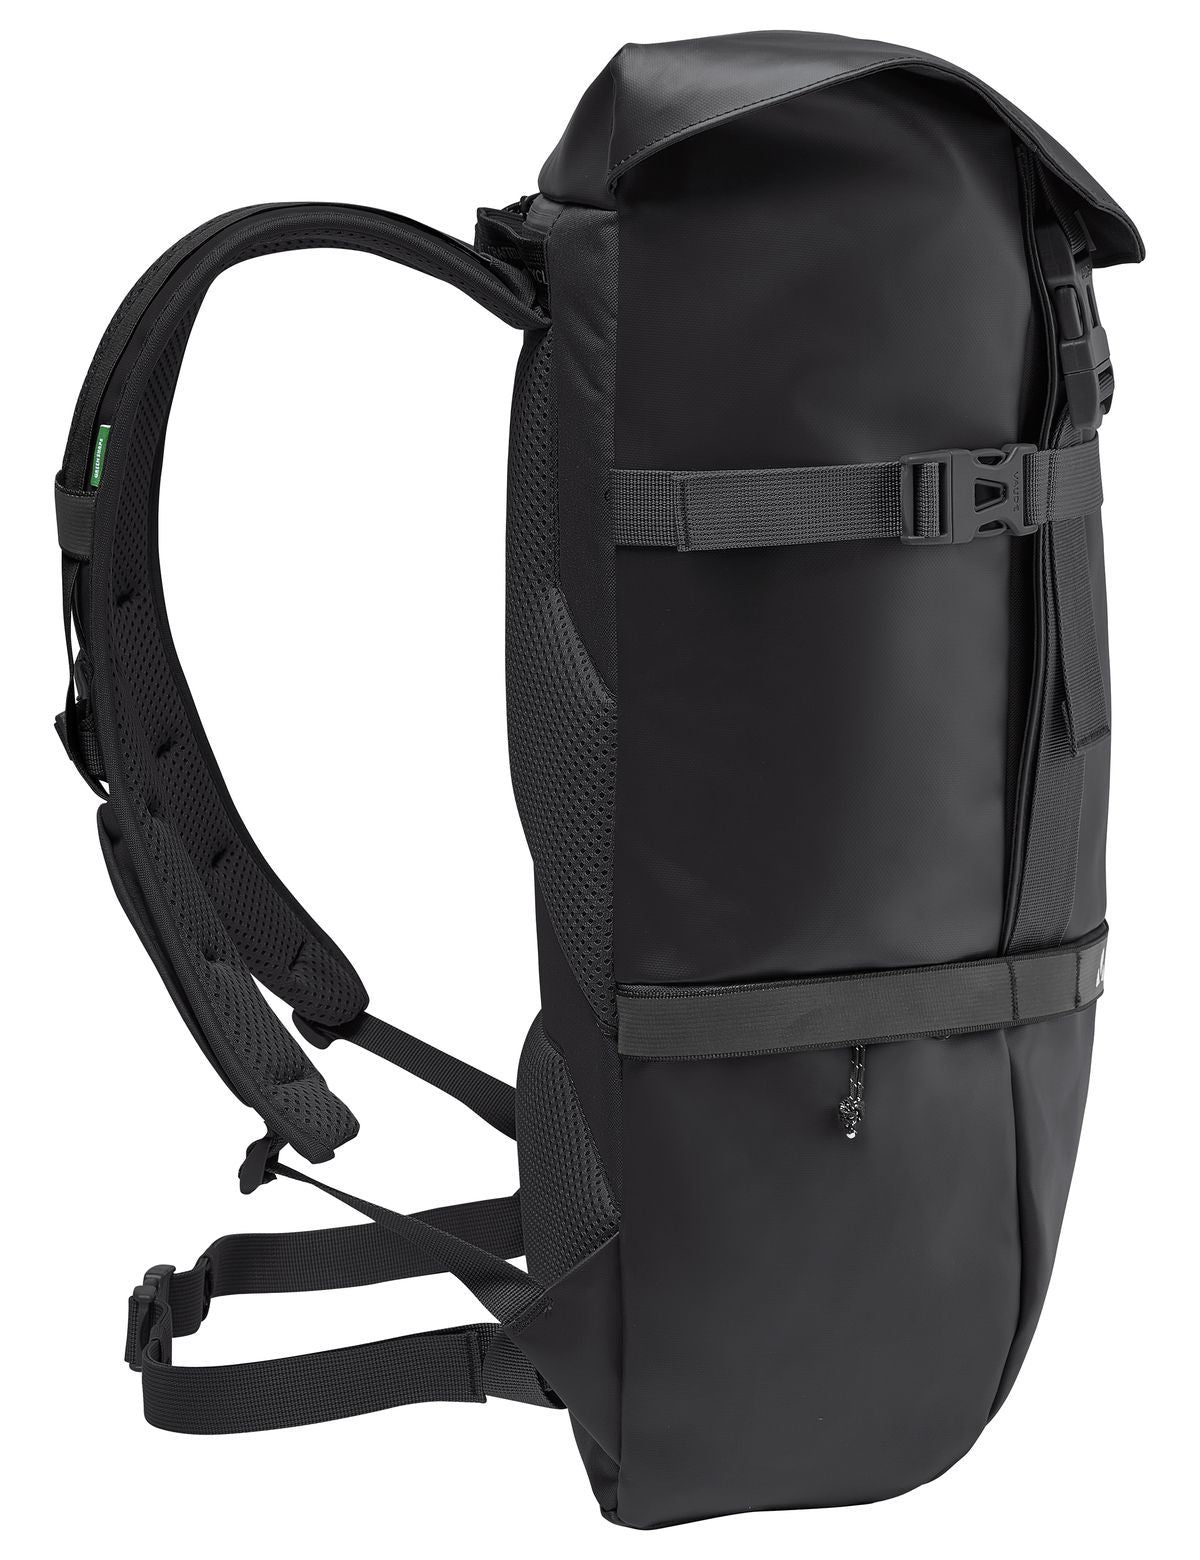 Mineo Backpack 30 Rucksack von Vaude - Laure Bags and Travel